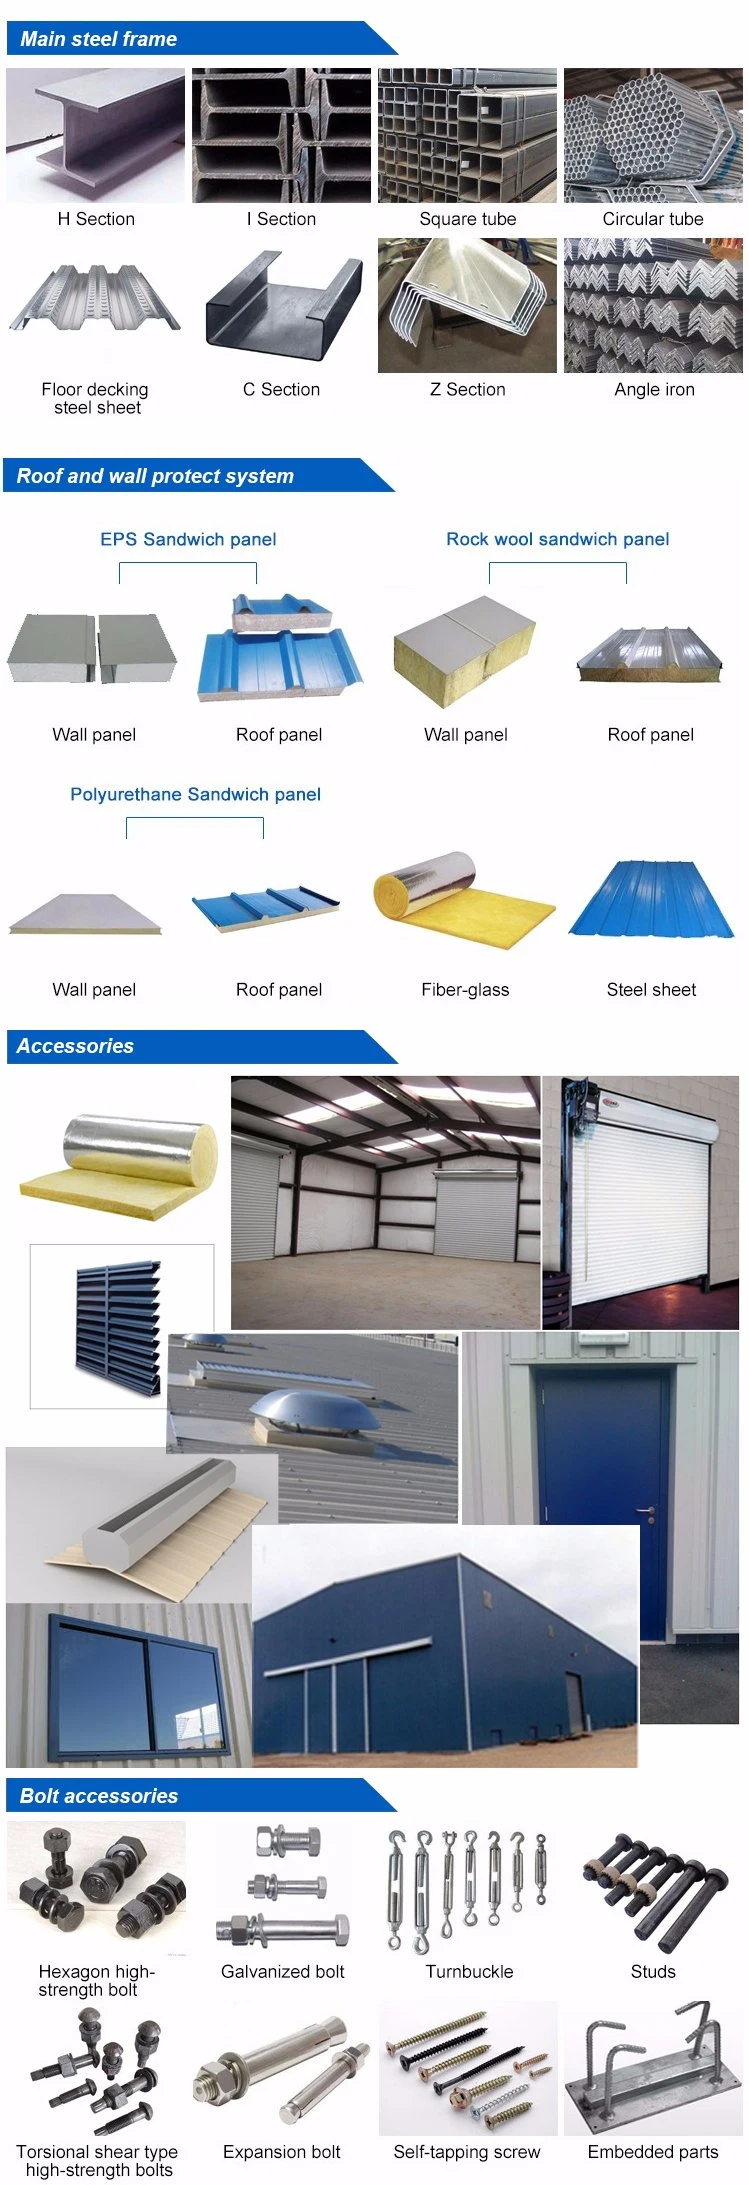 Factory Directly Supply Steel Structure Prefabricated Building/Metal Building/Prefab Building